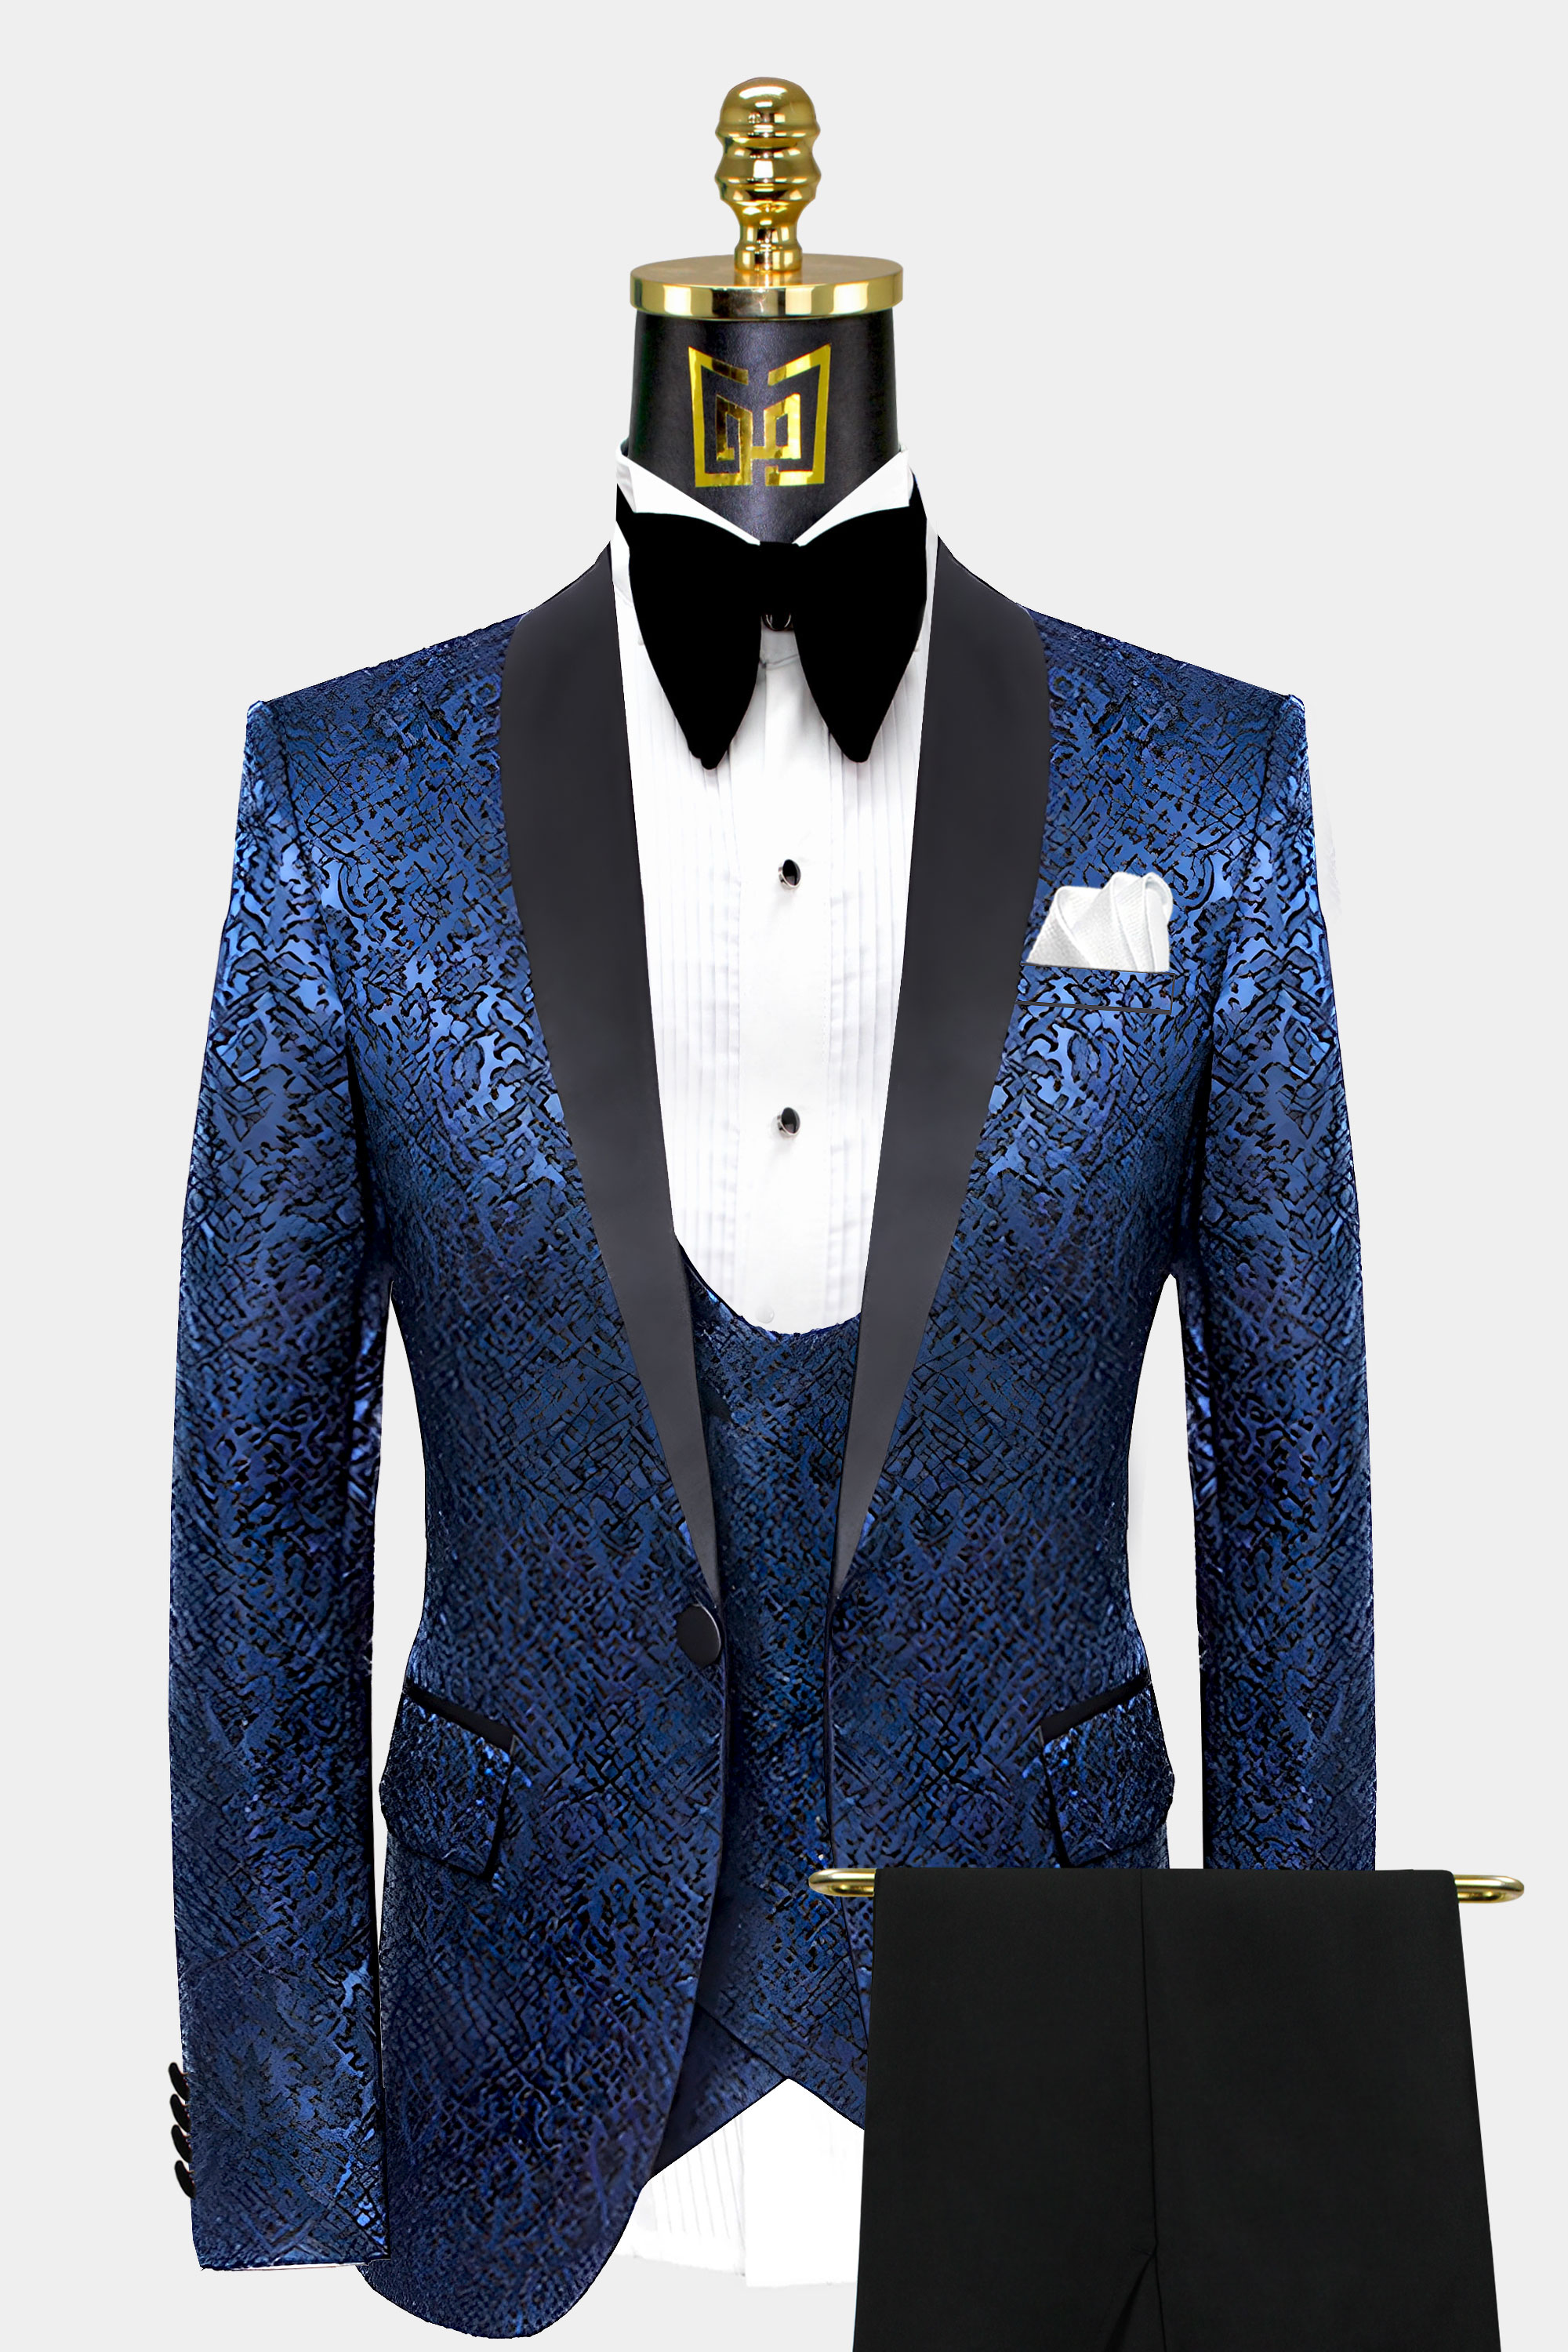 Stylish Navy Blue Two Piece Suit for Men for Wedding and Events 